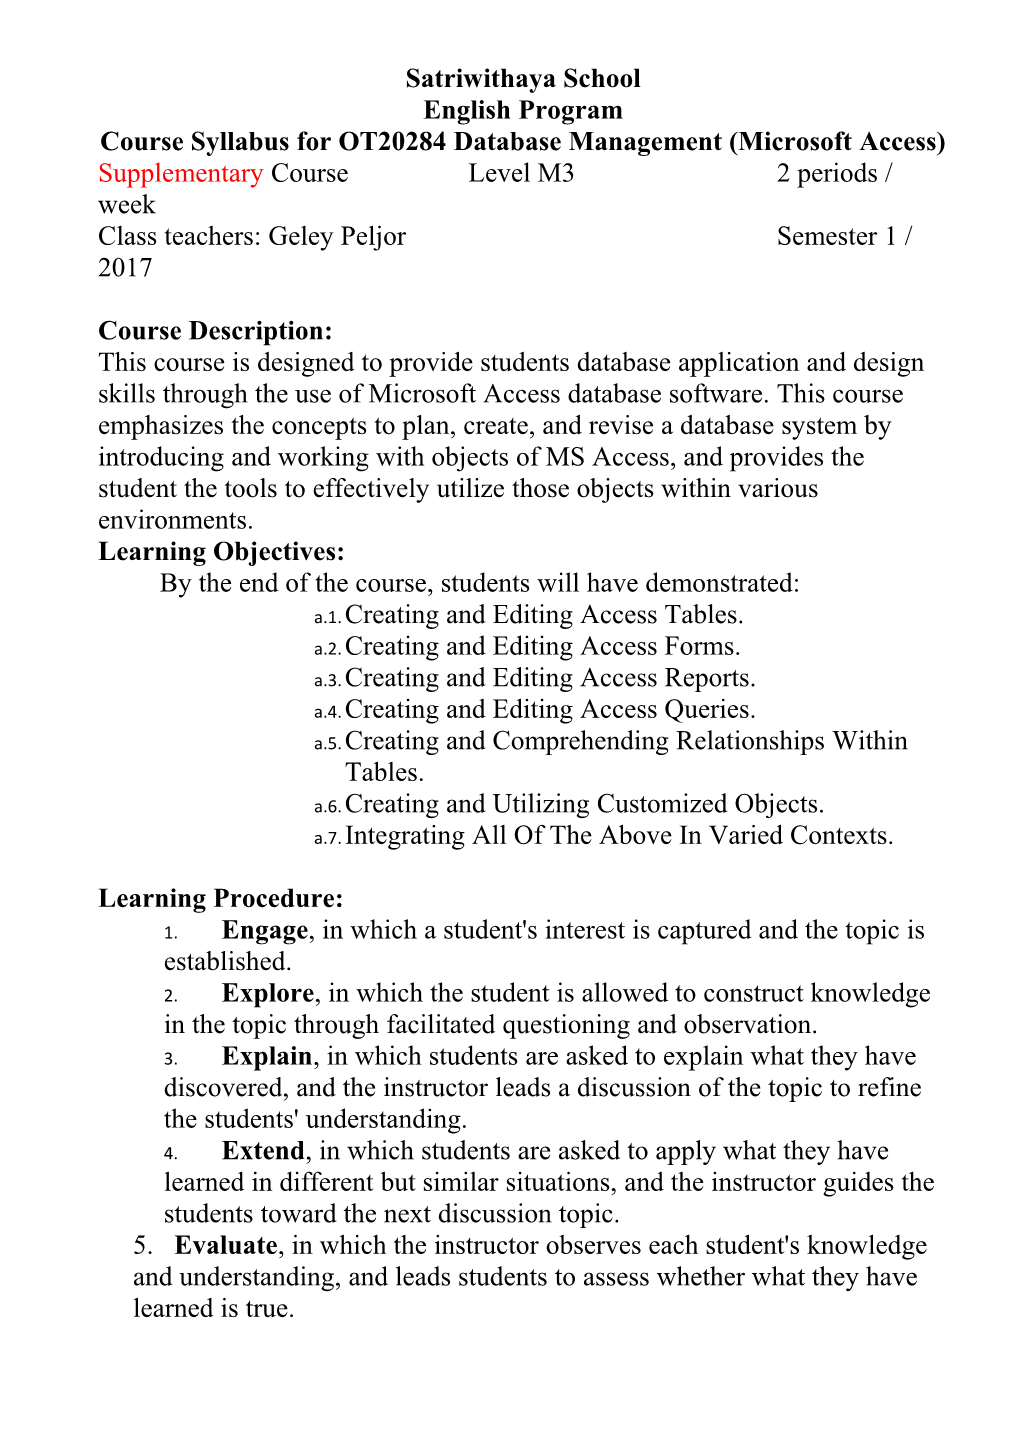 Course Syllabus for OT20284 Database Management (Microsoft Access)